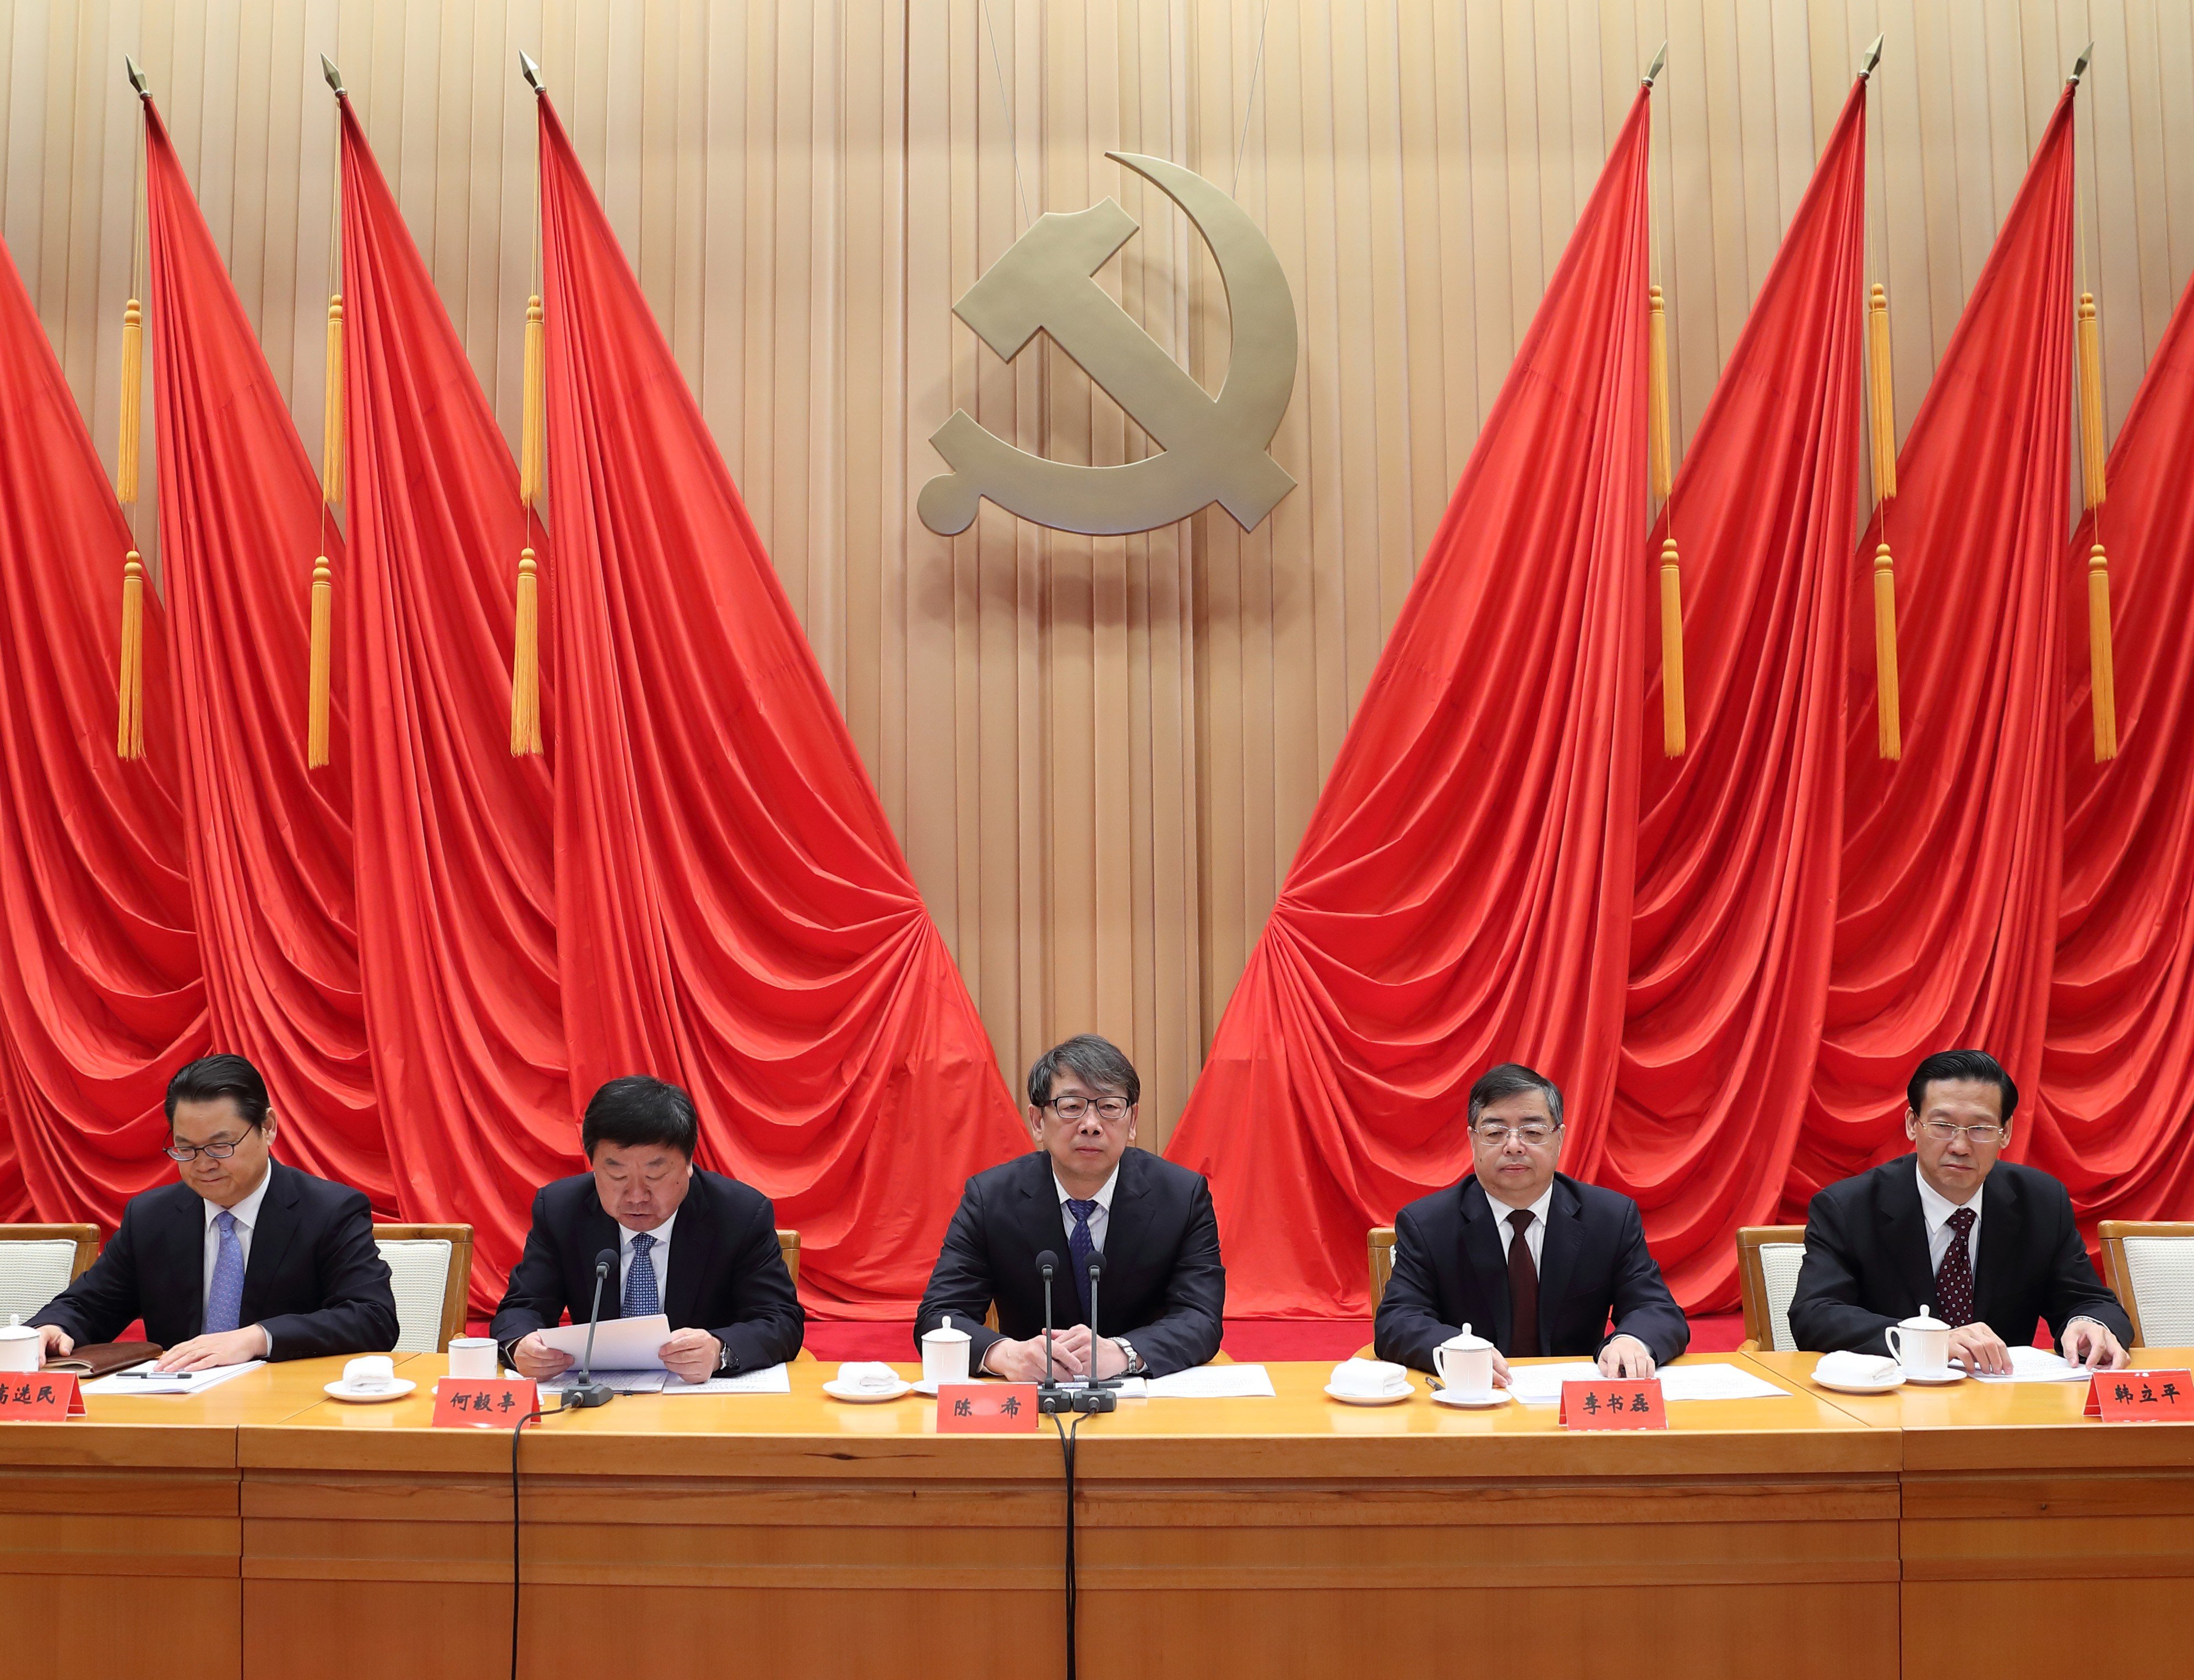 Chen Xi (centre), the recently appointed personnel chief, said the violation of political principles was no less damaging to China’s Communist Party than corruption. Photo: Xinhua